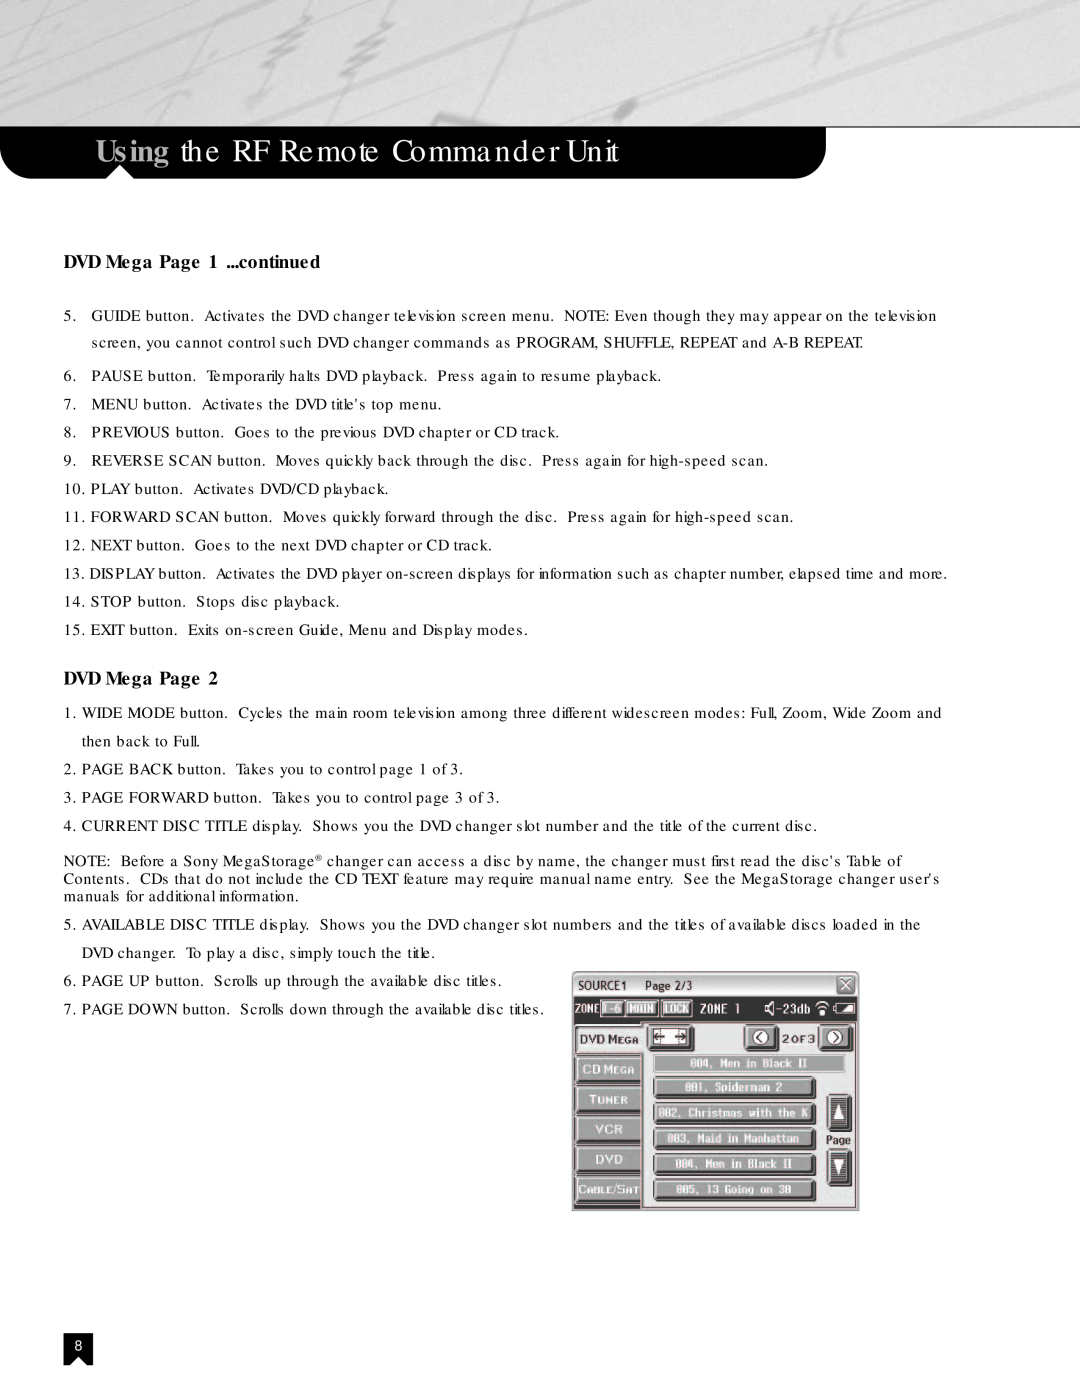 Sony NHS-2000 manual DVD Mega Page 1 ...continued, Using the RF Remote Commander Unit 